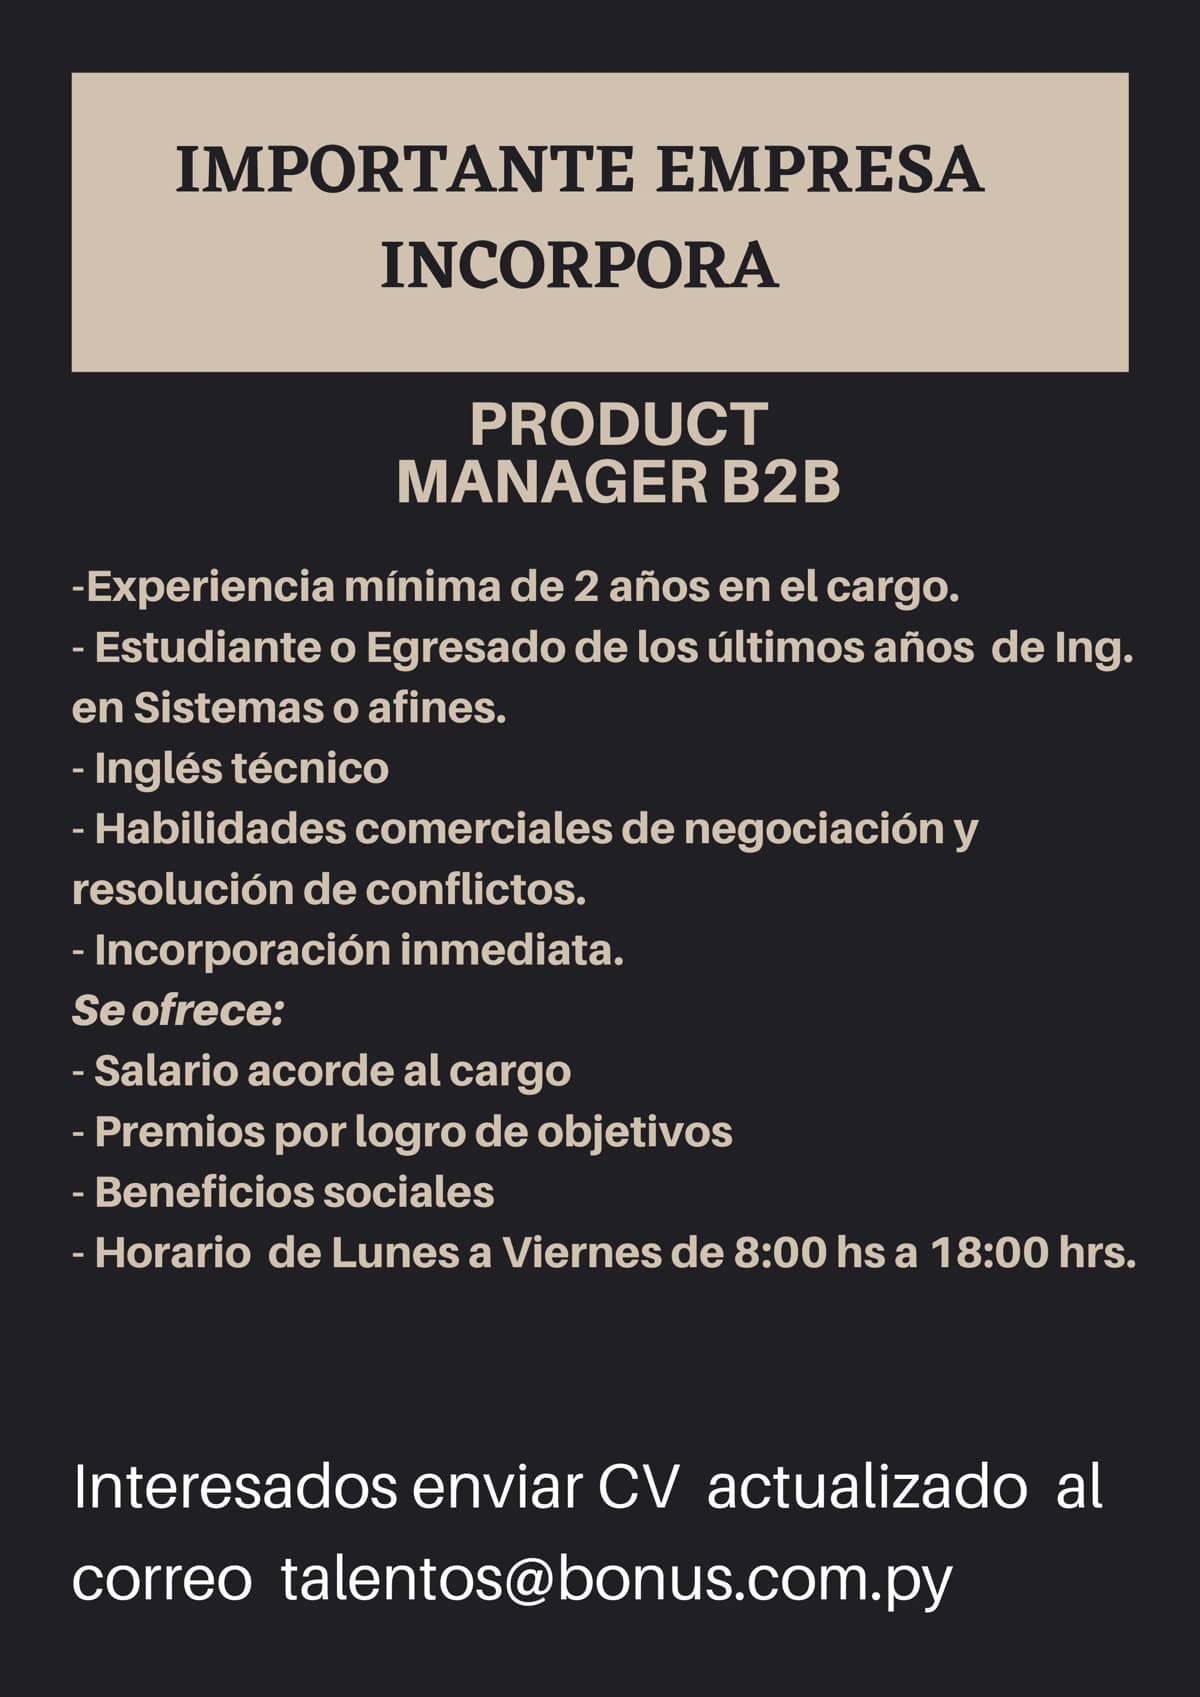 Product Manager B2B